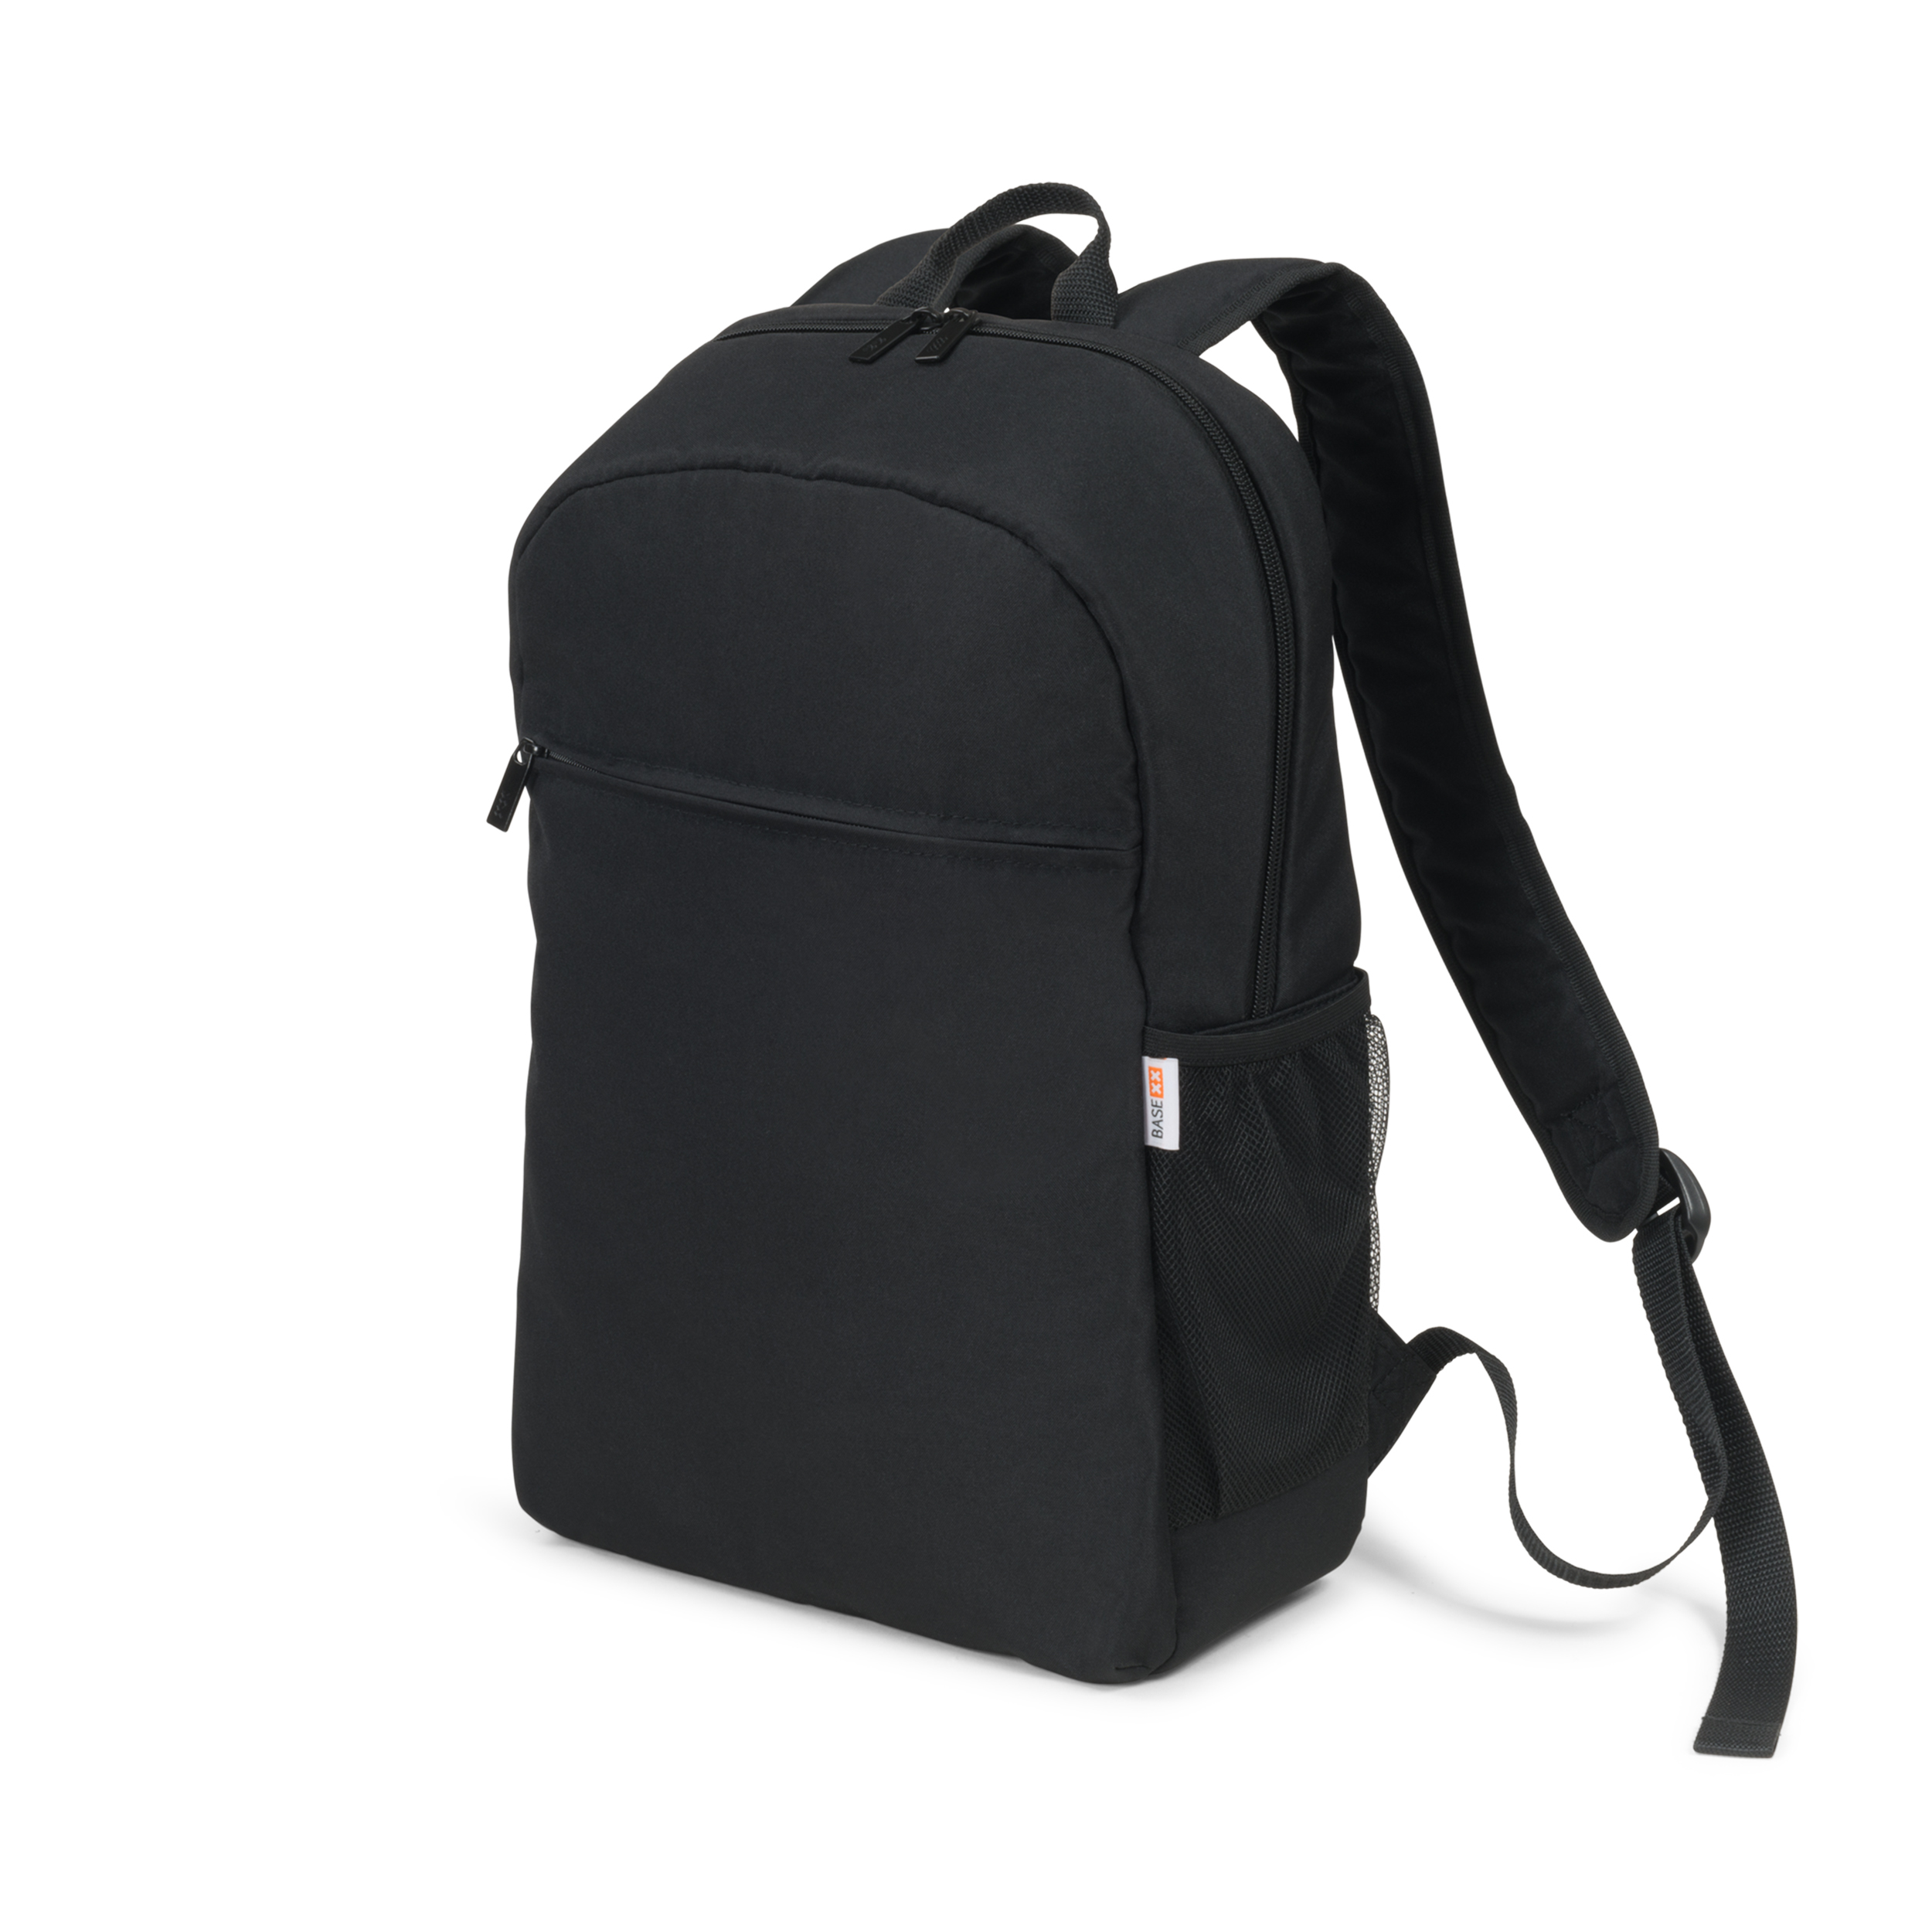 Dicota - Consignment             Base Xx Laptop Backpack             15-17.3in Black                     D31793